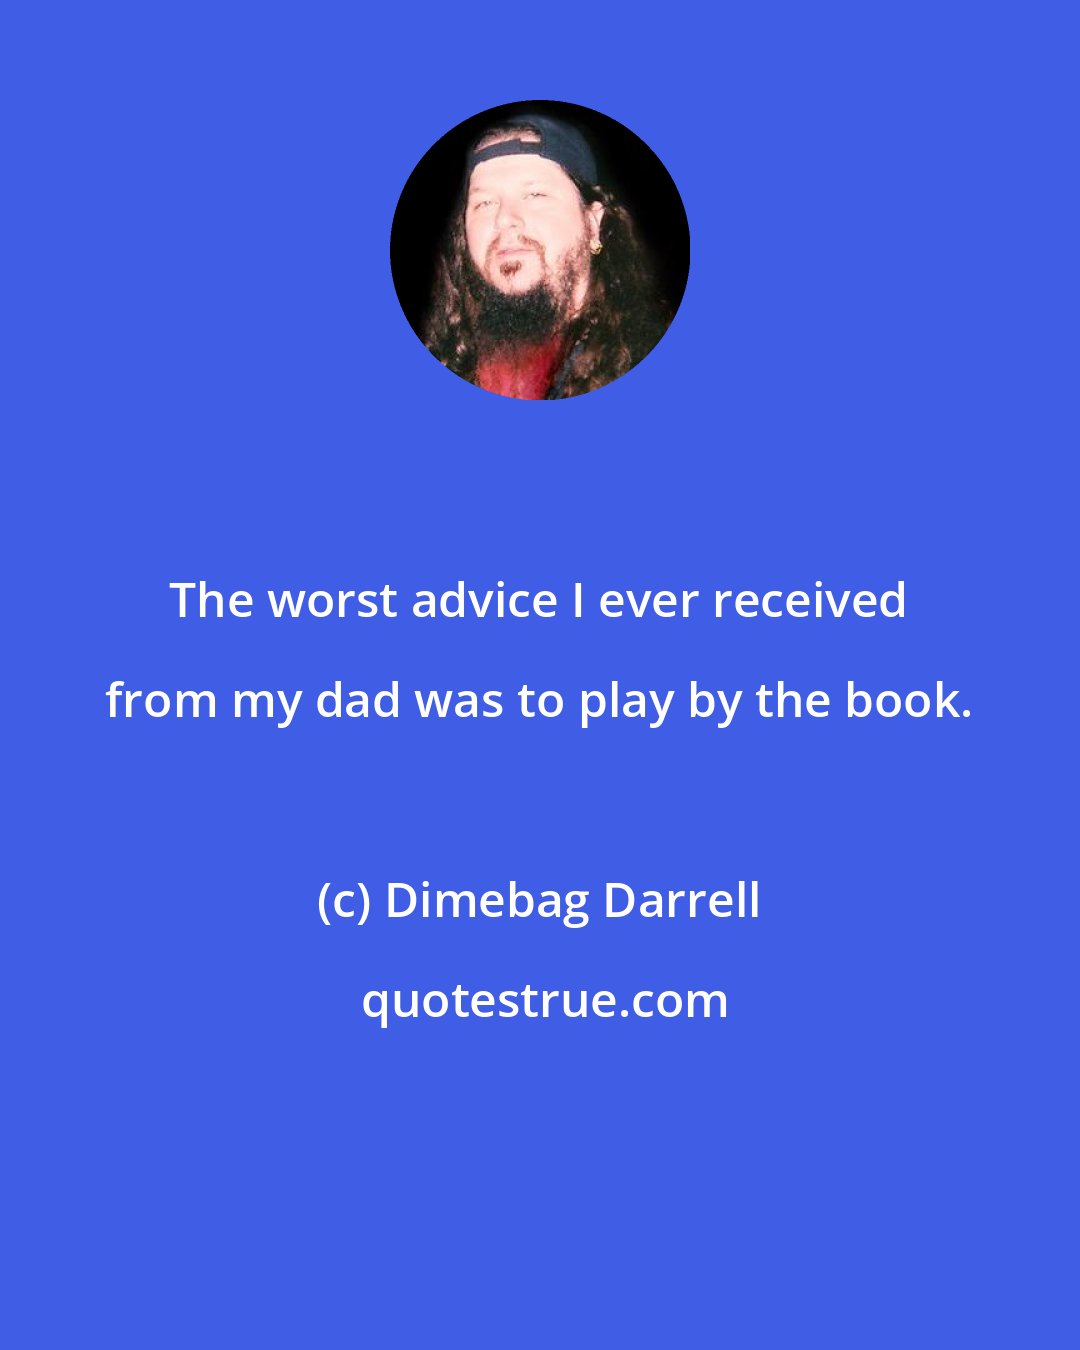 Dimebag Darrell: The worst advice I ever received from my dad was to play by the book.